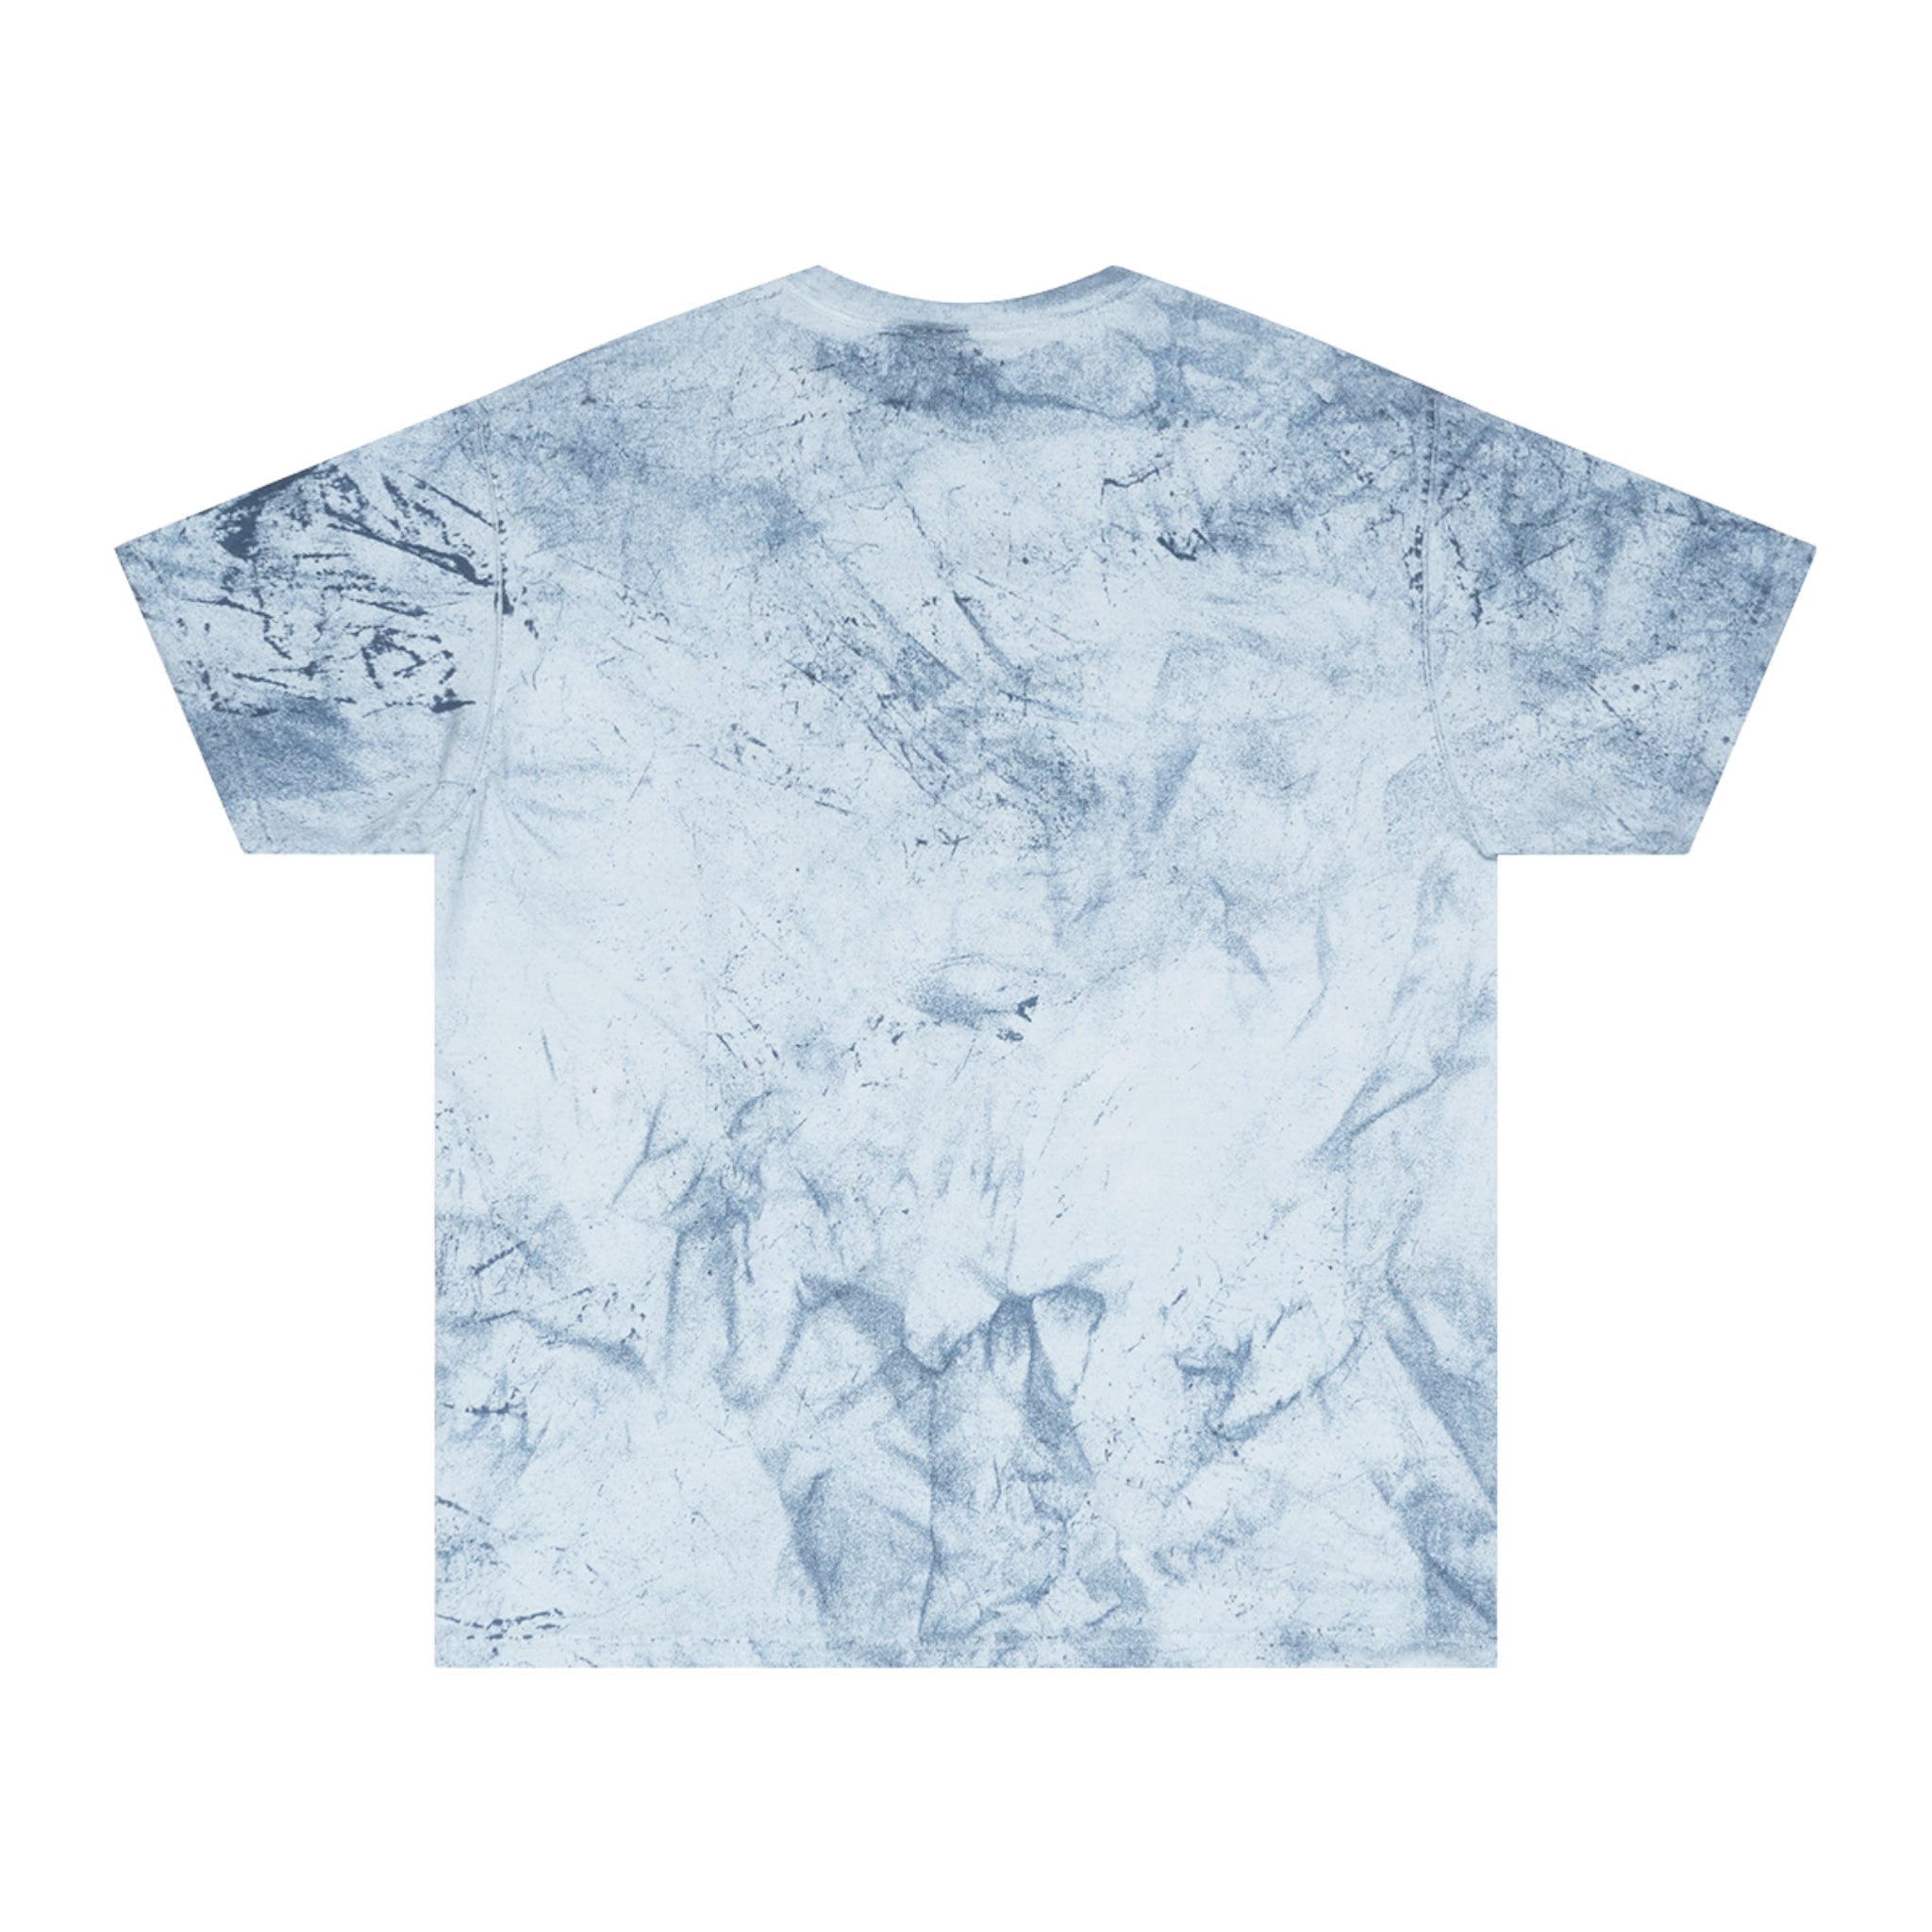 They Tyrant King Garment Dyed Tee